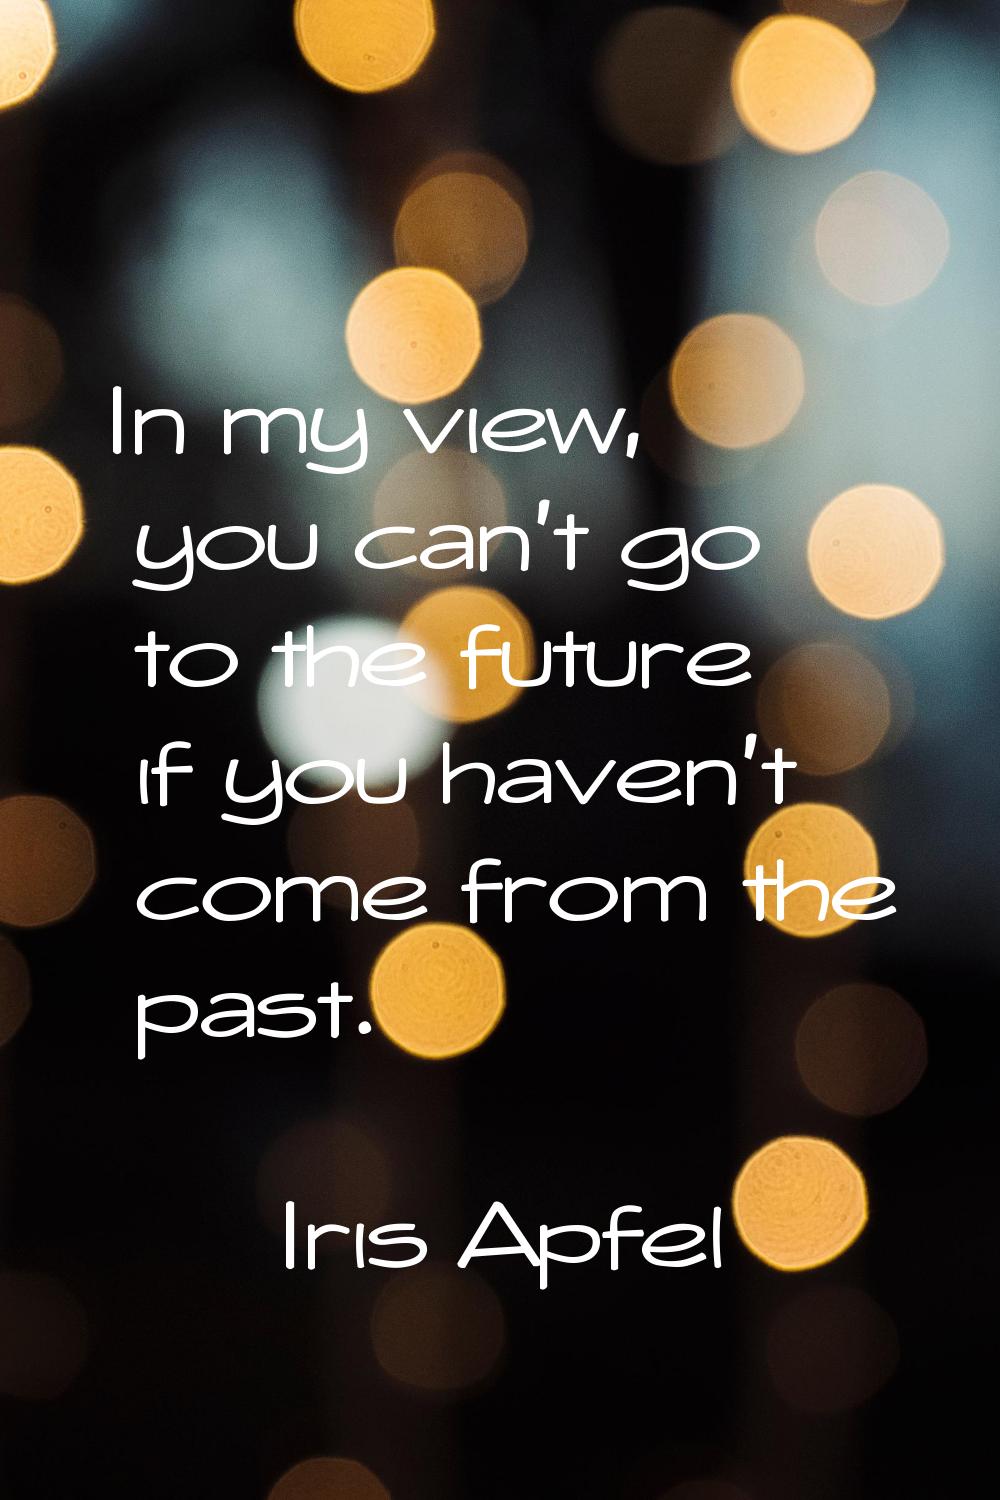 In my view, you can't go to the future if you haven't come from the past.